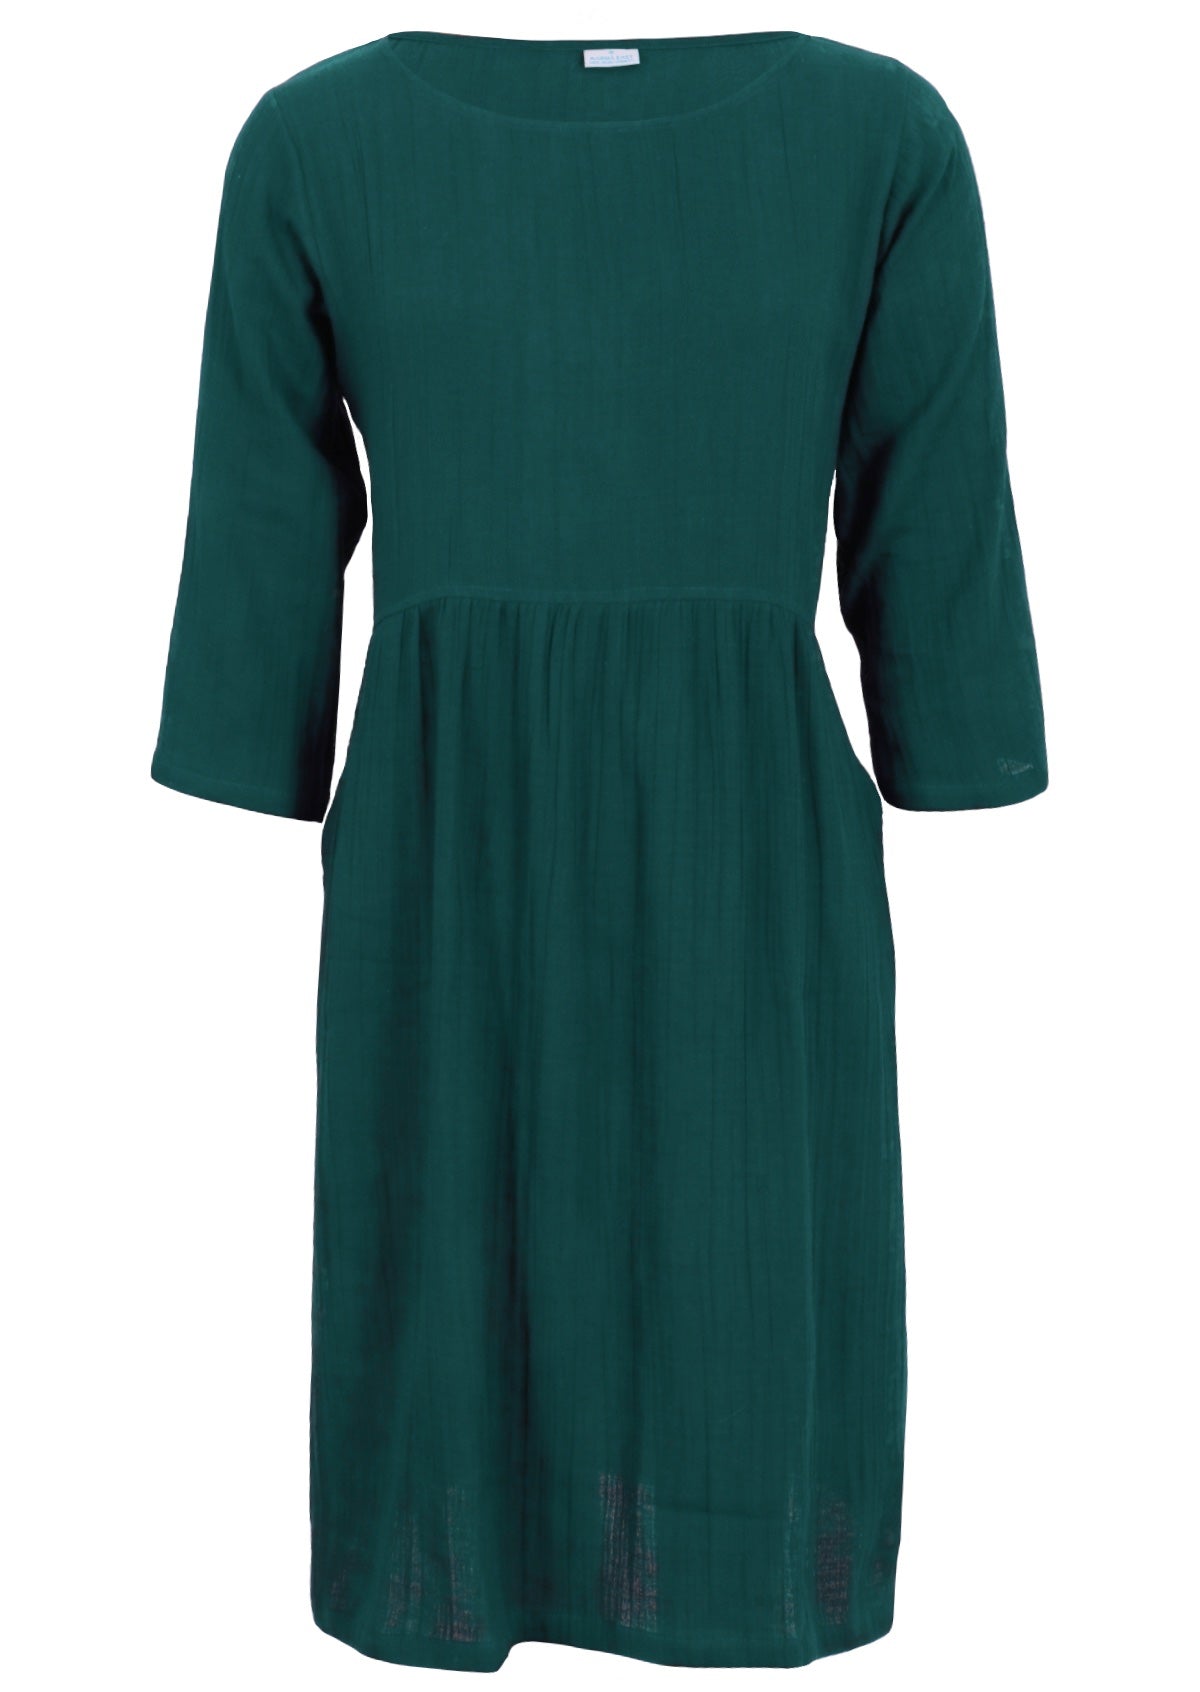 Double layer of cotton gauze dress in deep teal